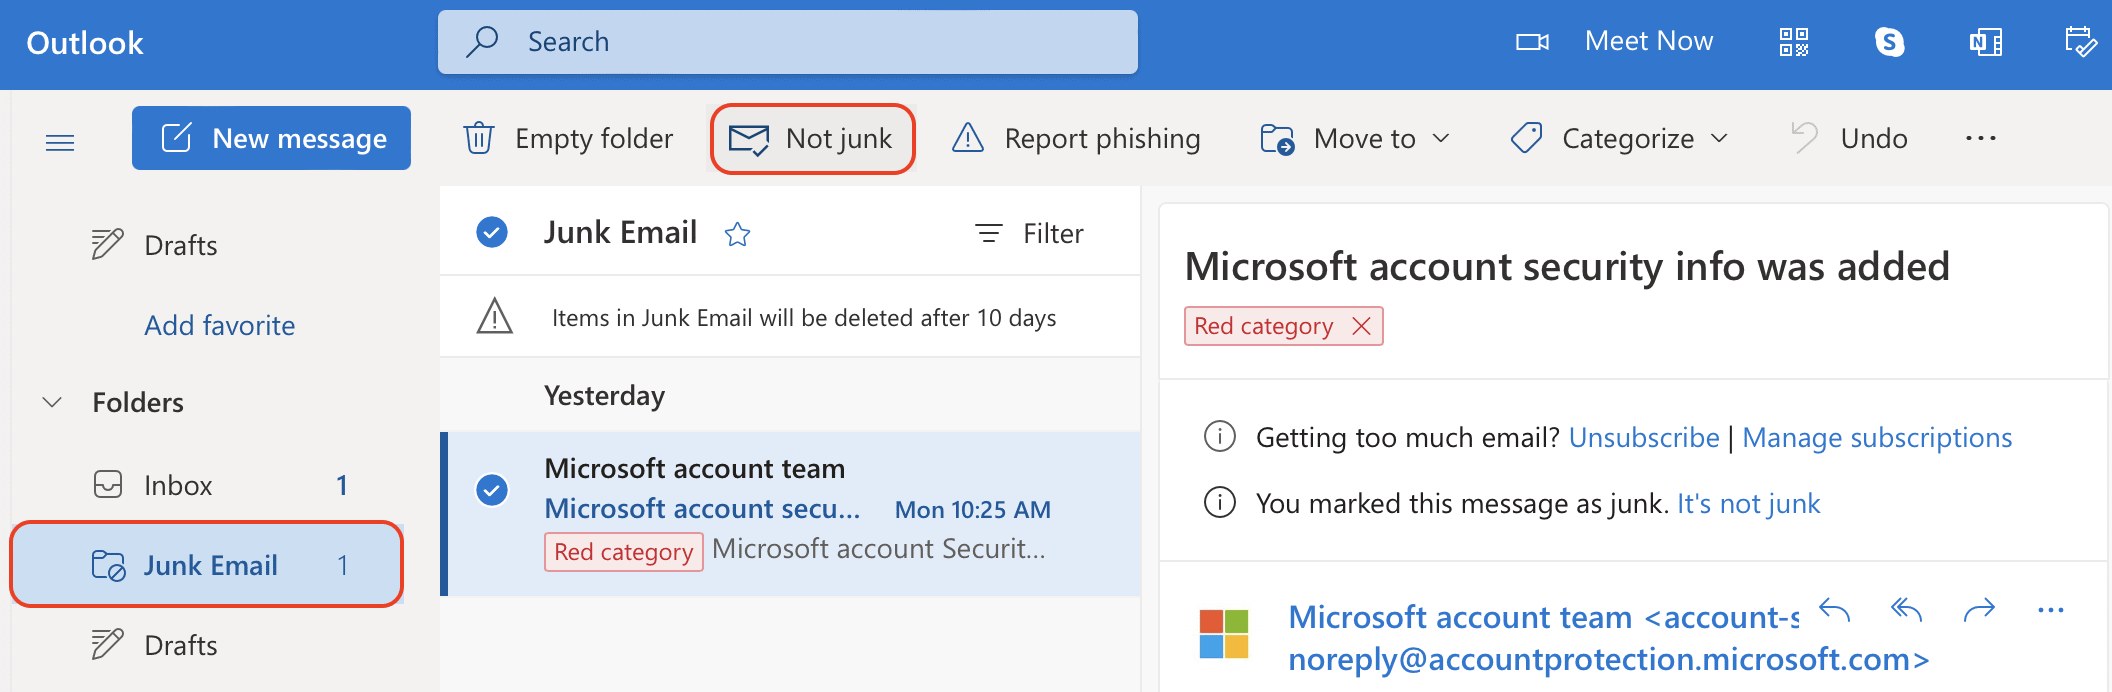 Outlook Junk Email